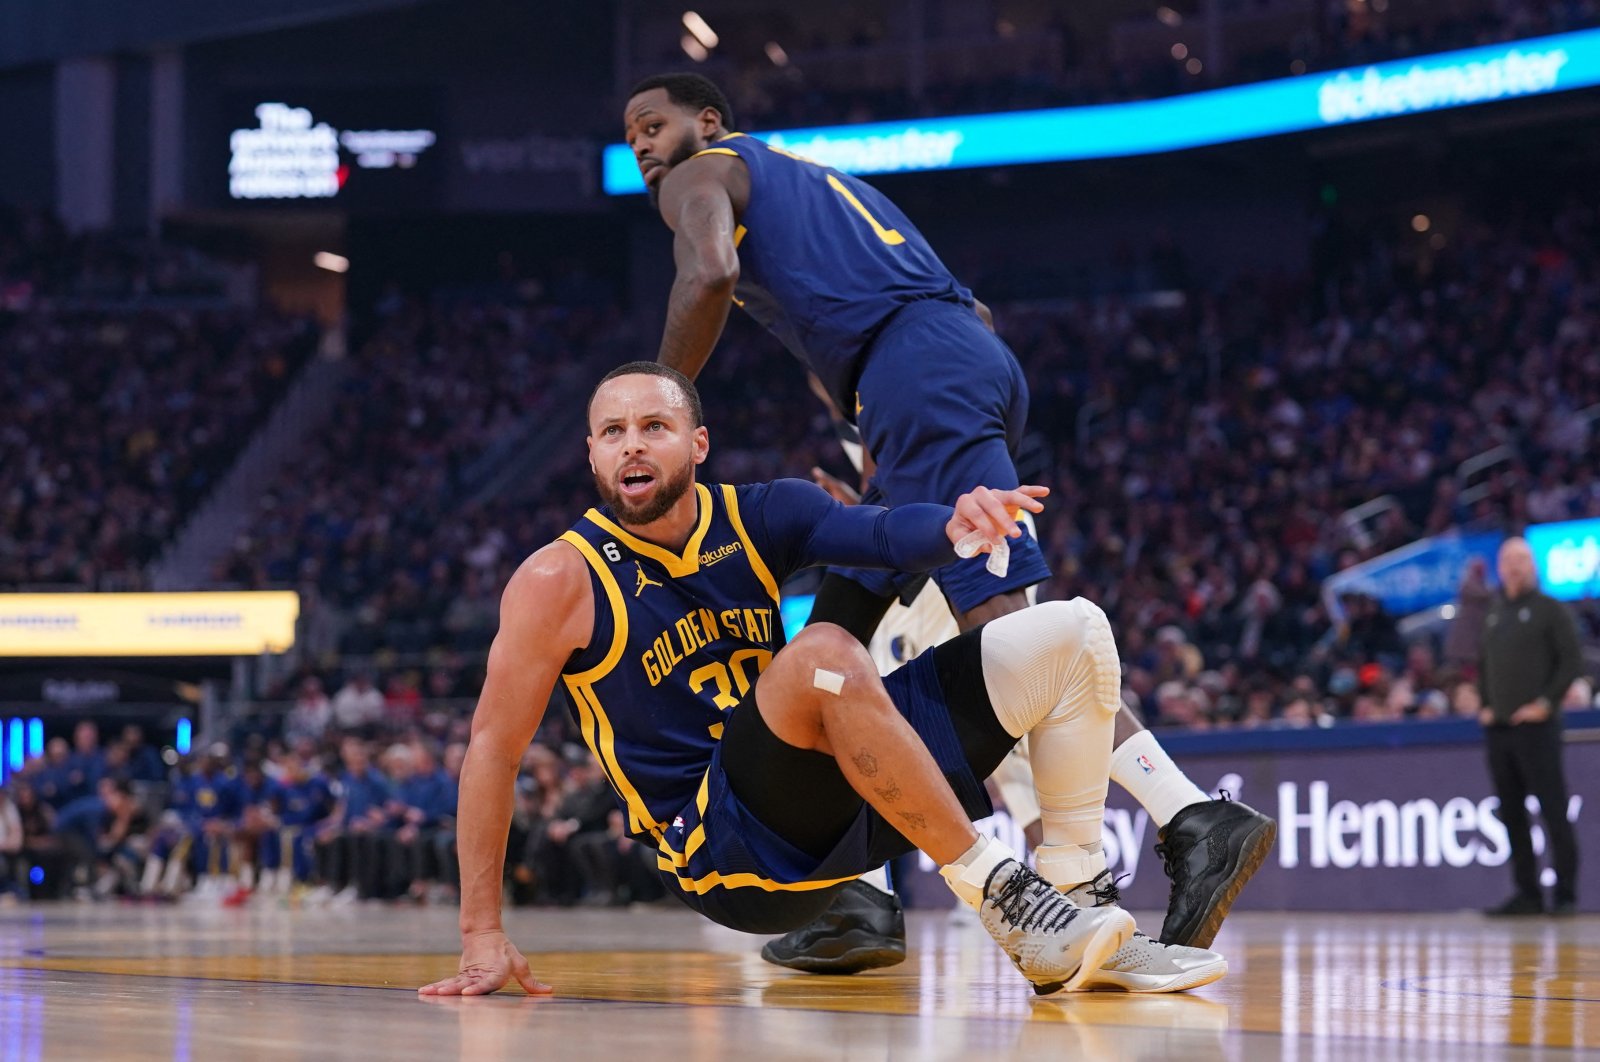 Golden State Warriors guard Stephen Curry (L) regains his footing after being knocked to the ground against the Dallas Mavericks in the first quarter at the Chase Center, San Francisco, U.S., Feb. 4, 2023. (Reuters Photo)